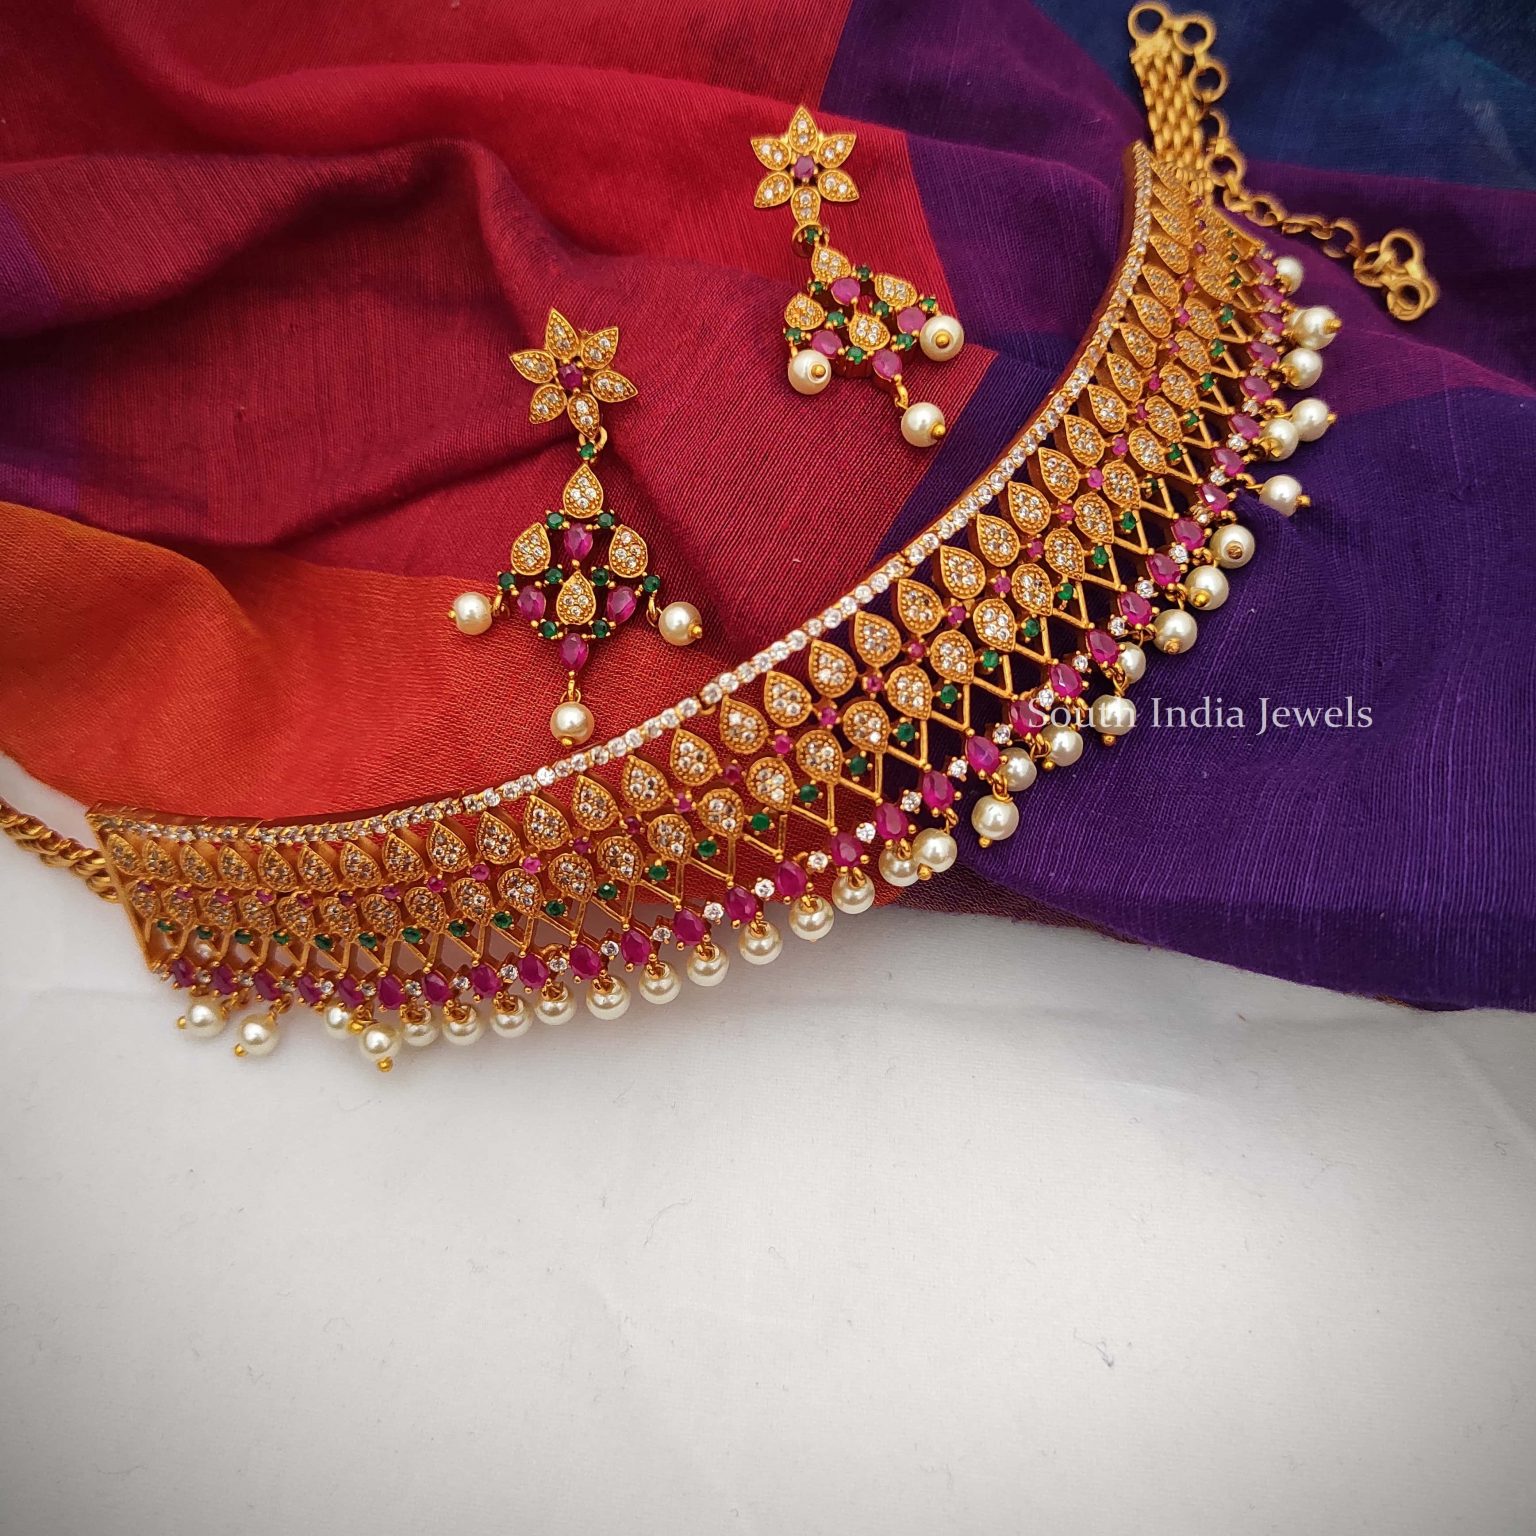 Traditional Flower Design Choker - South India Jewels